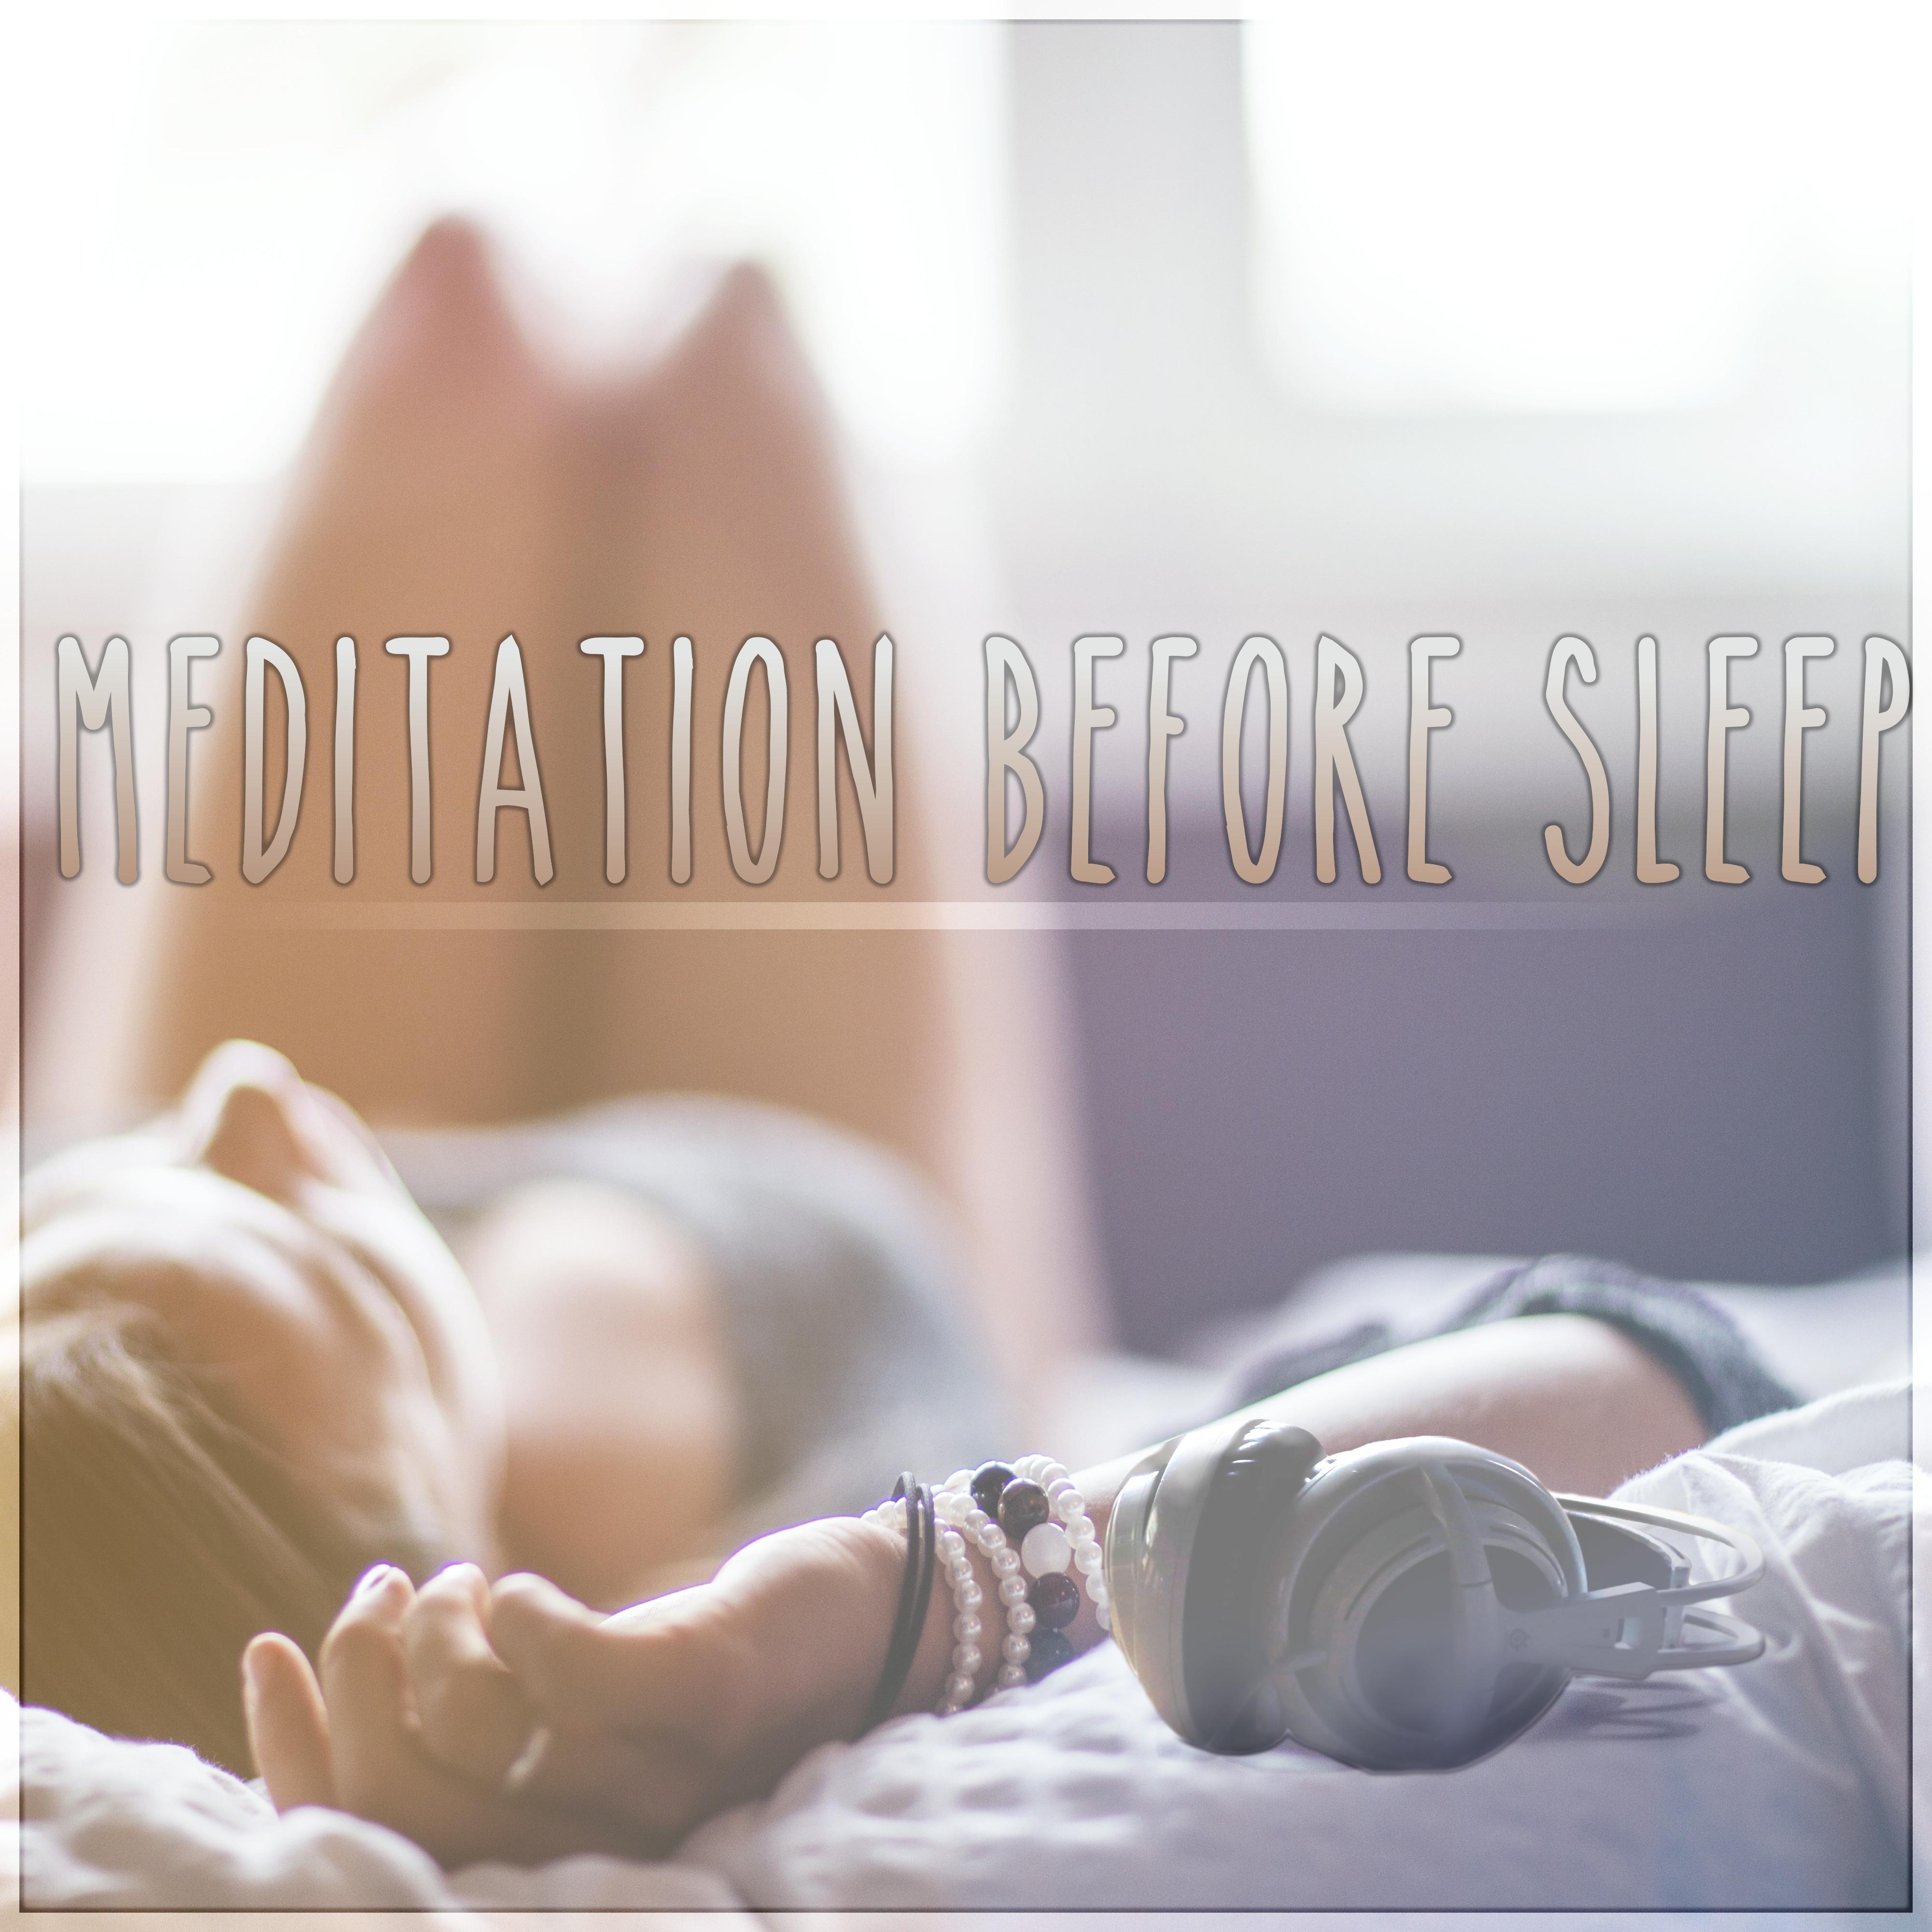 Meditation Before Sleep - Best Healing Sleep Songs, Deep Sleep & Meditation for Adult and Baby, White Noises and Nature Sounds to Relax and Fall Asleep